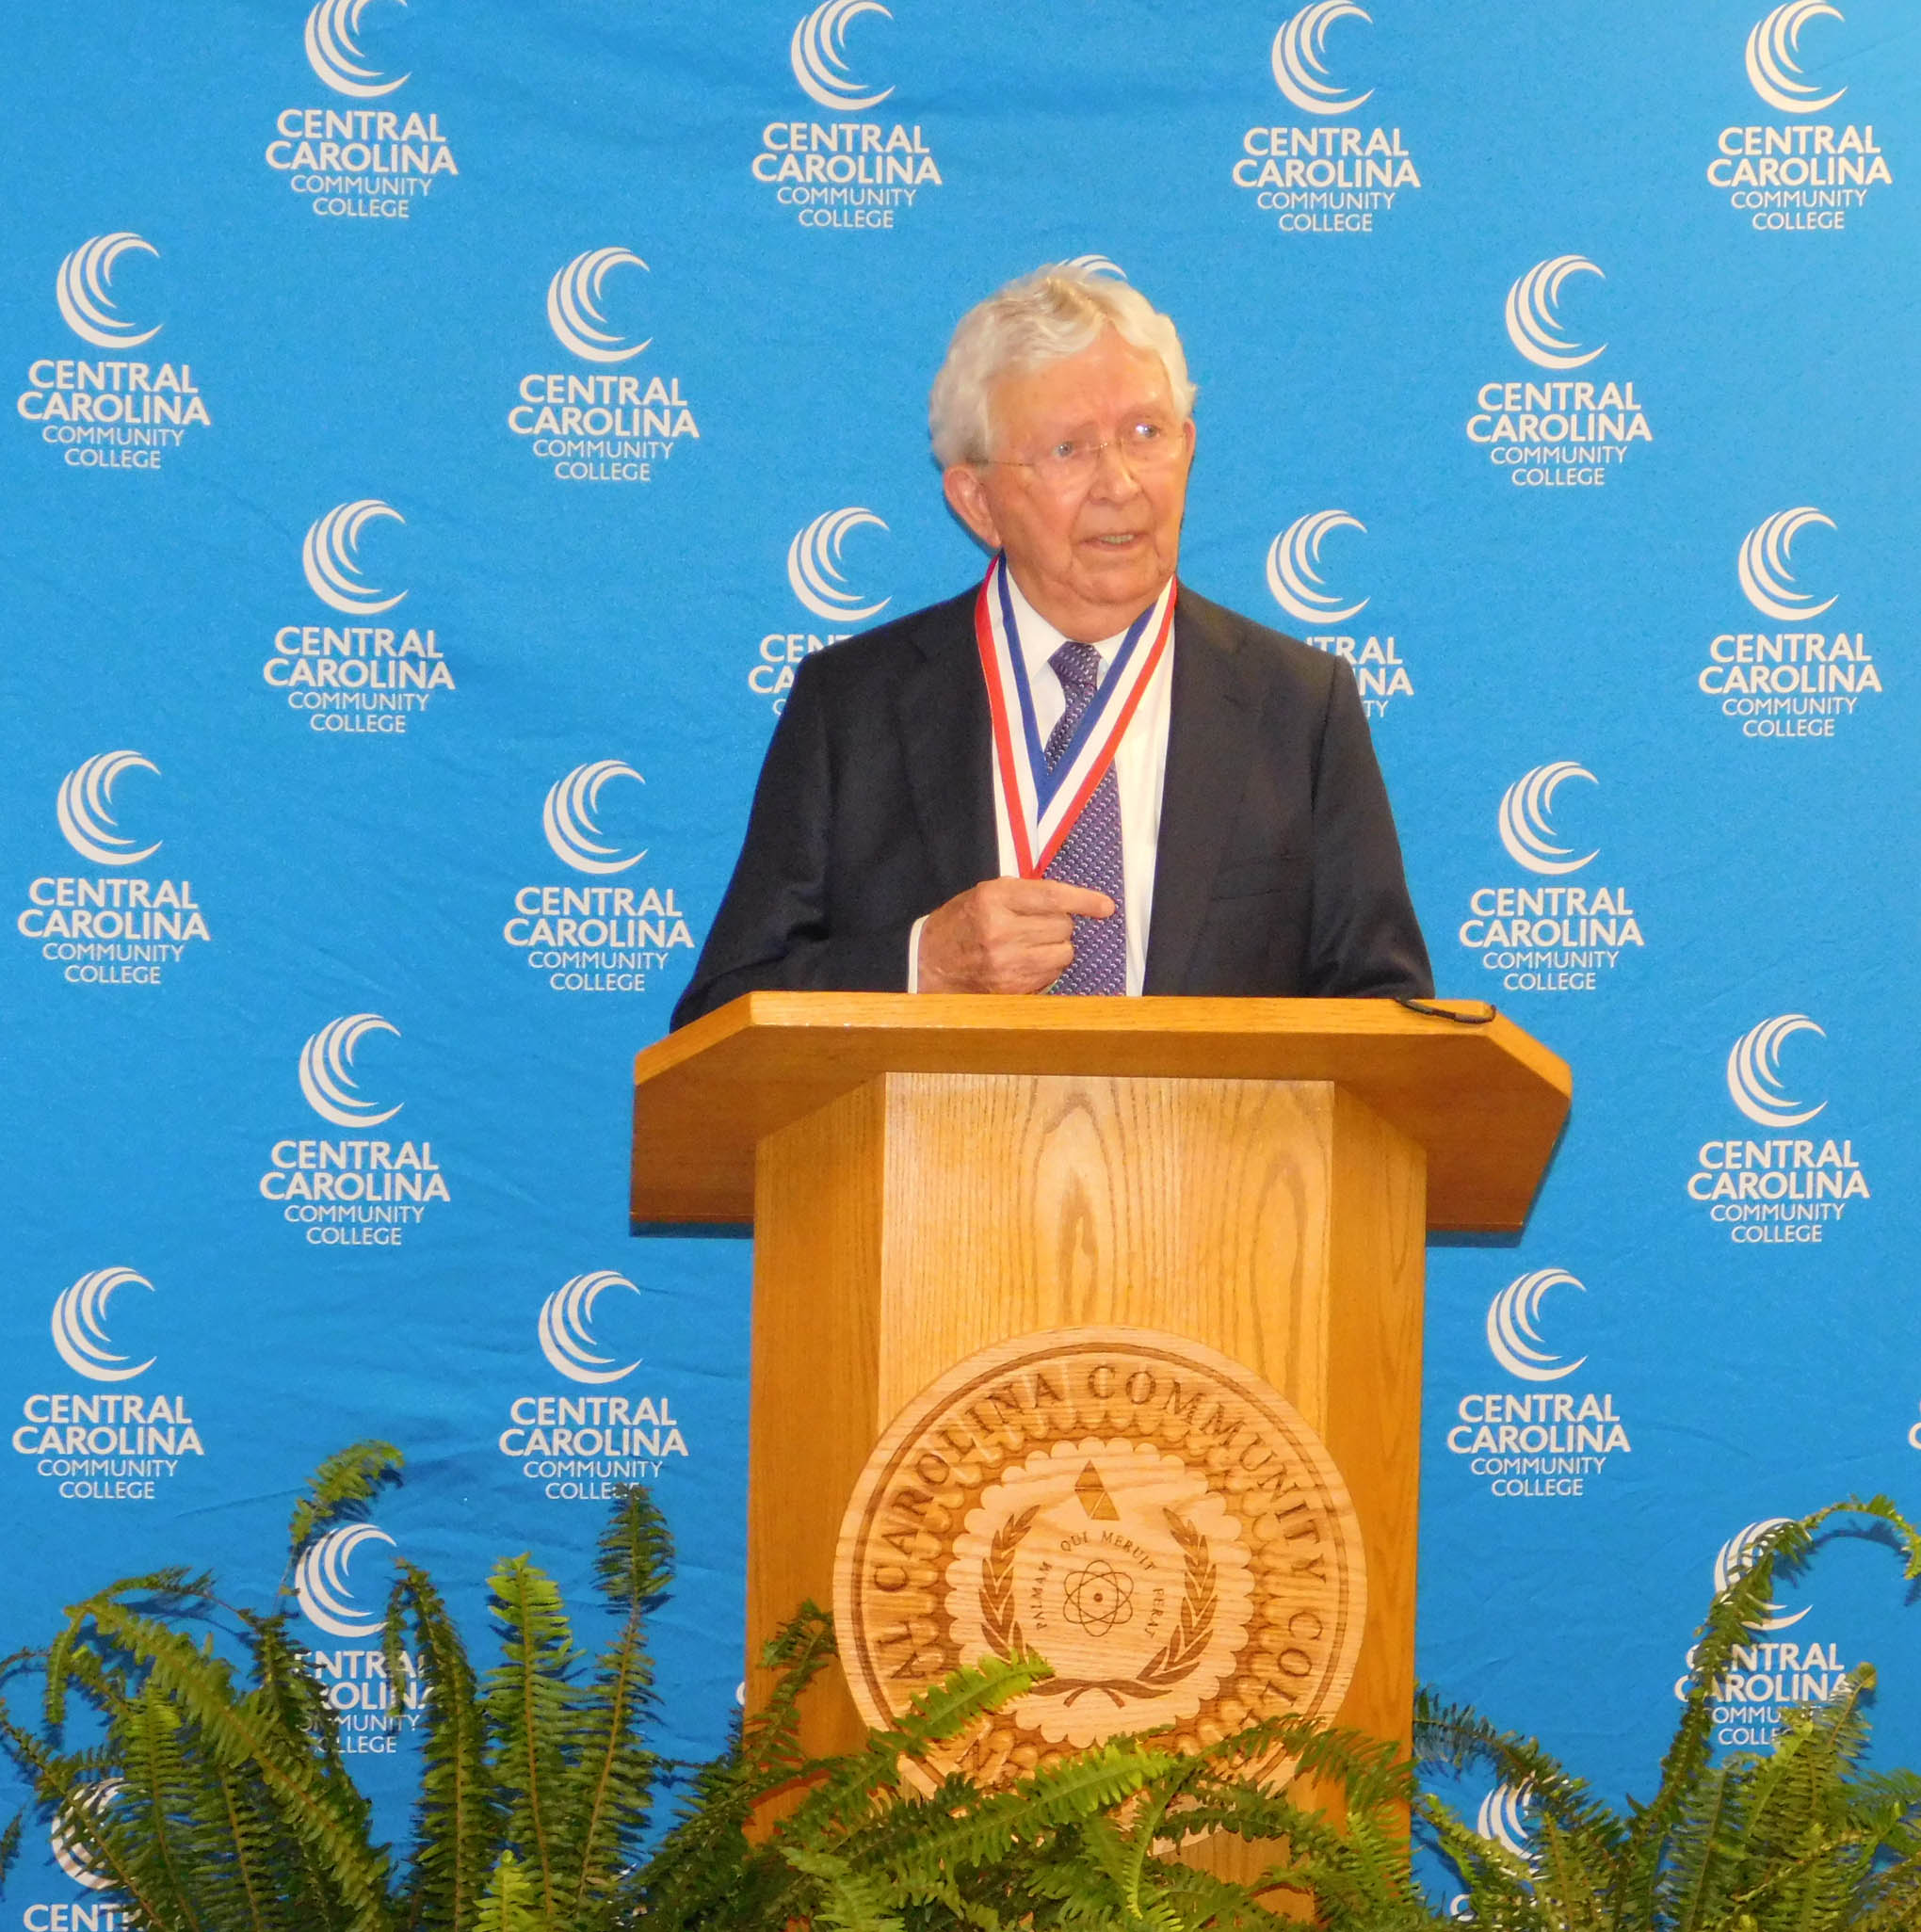 Click to enlarge,  Dr. J.F. Hockaday, president of Central Carolina Community College from 1969 to 1983, has been recognized as the latest recipient of the I.E. Ready Award, the highest honor bestowed by the State Board of Community Colleges. 